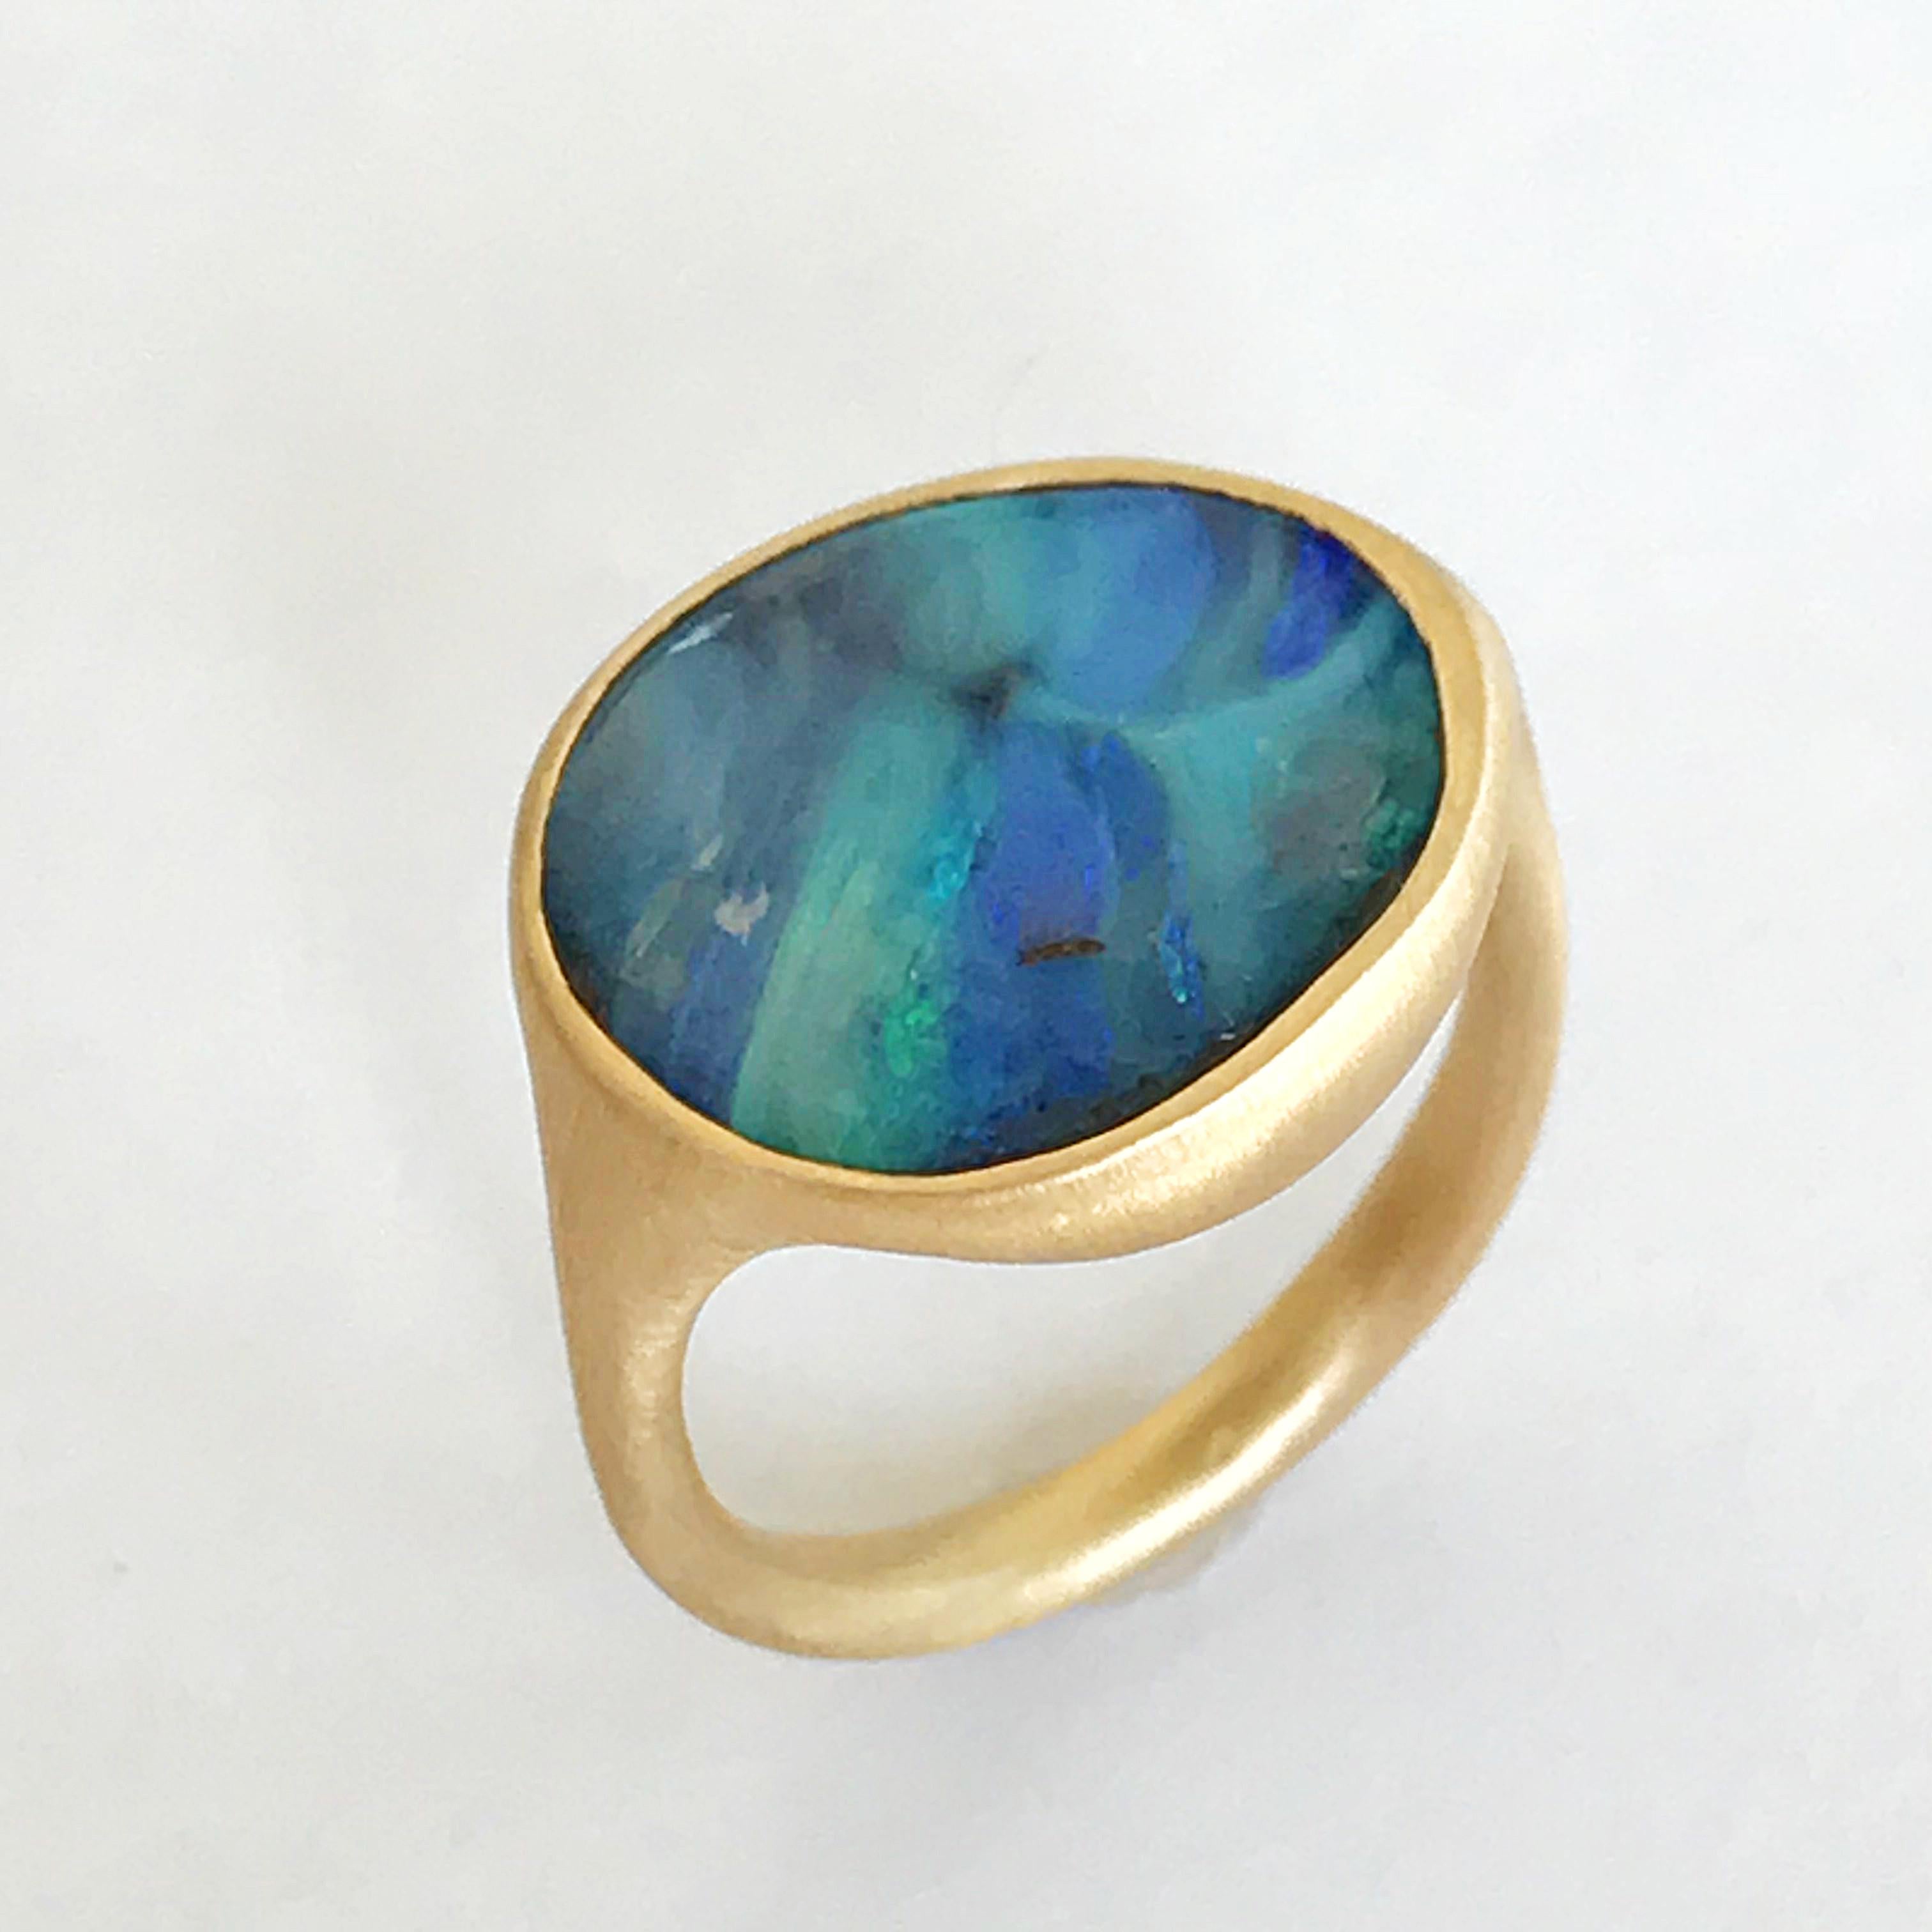 Dalben design One of a kind 18 kt yellow gold ring with a 6,8 carats bezel-set blue stone shape Australian Boulder Opal  .  
Ring size 6  - EU 52 re-sizable .  
Bezel setting dimension:  
max width 17,6 mm,  
max height 15,5 mm. 
The ring has been